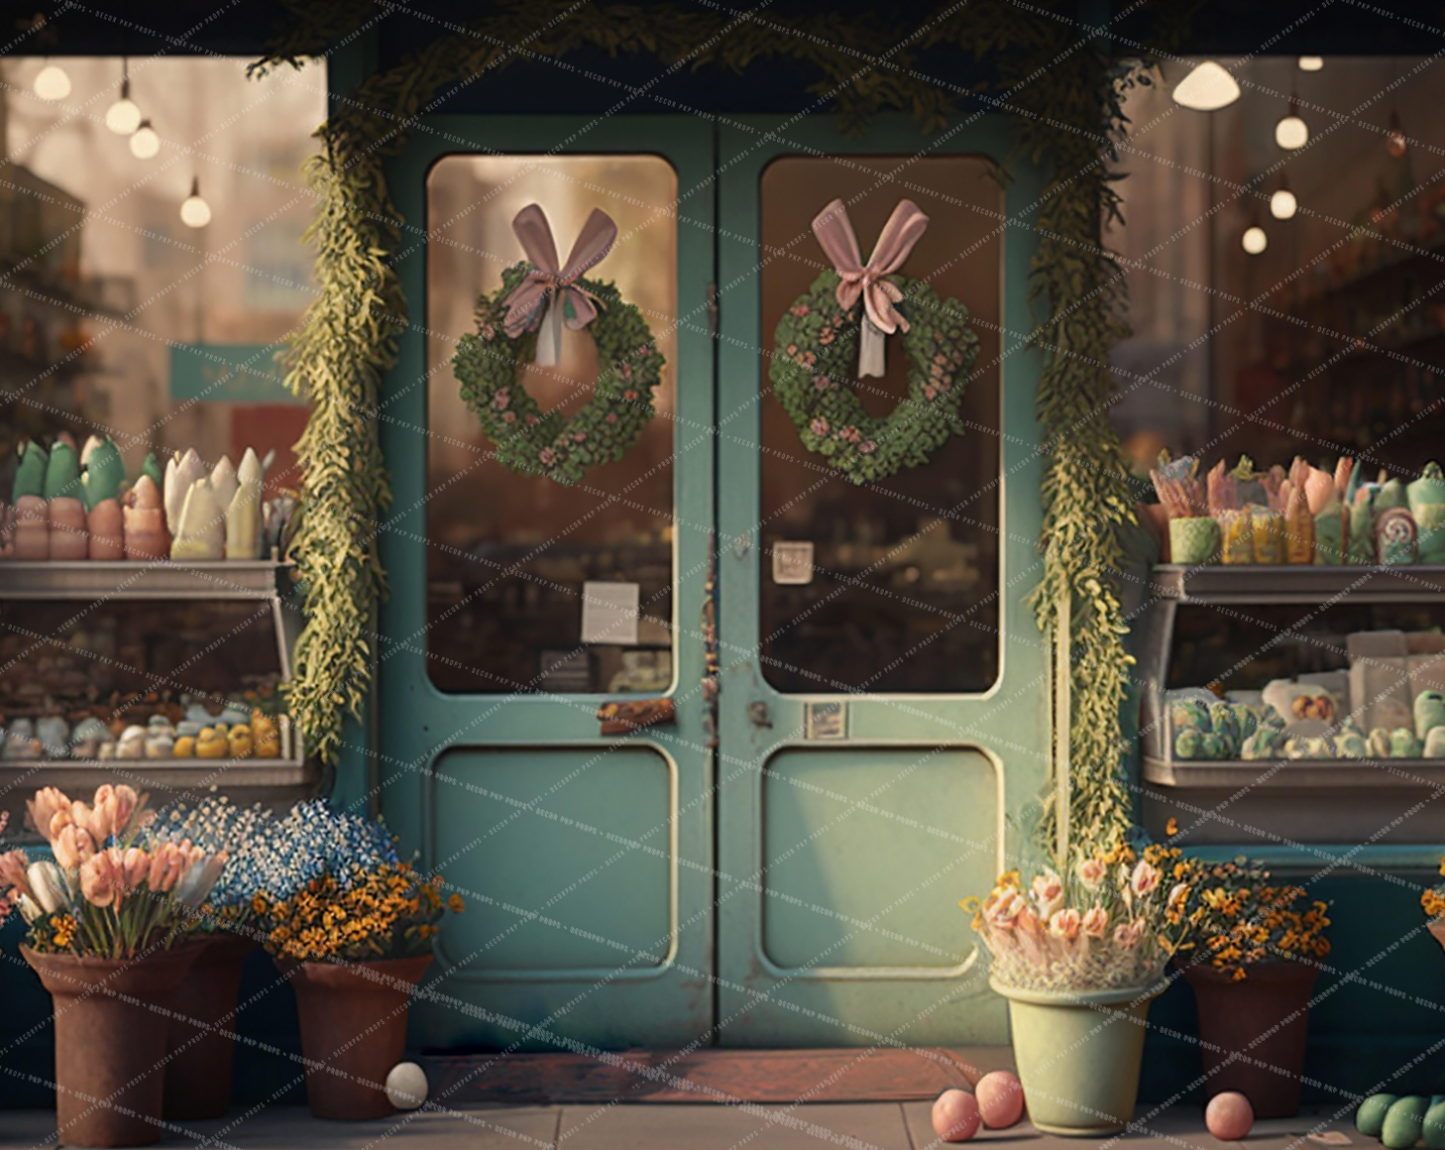 EASTER SHOP - AS